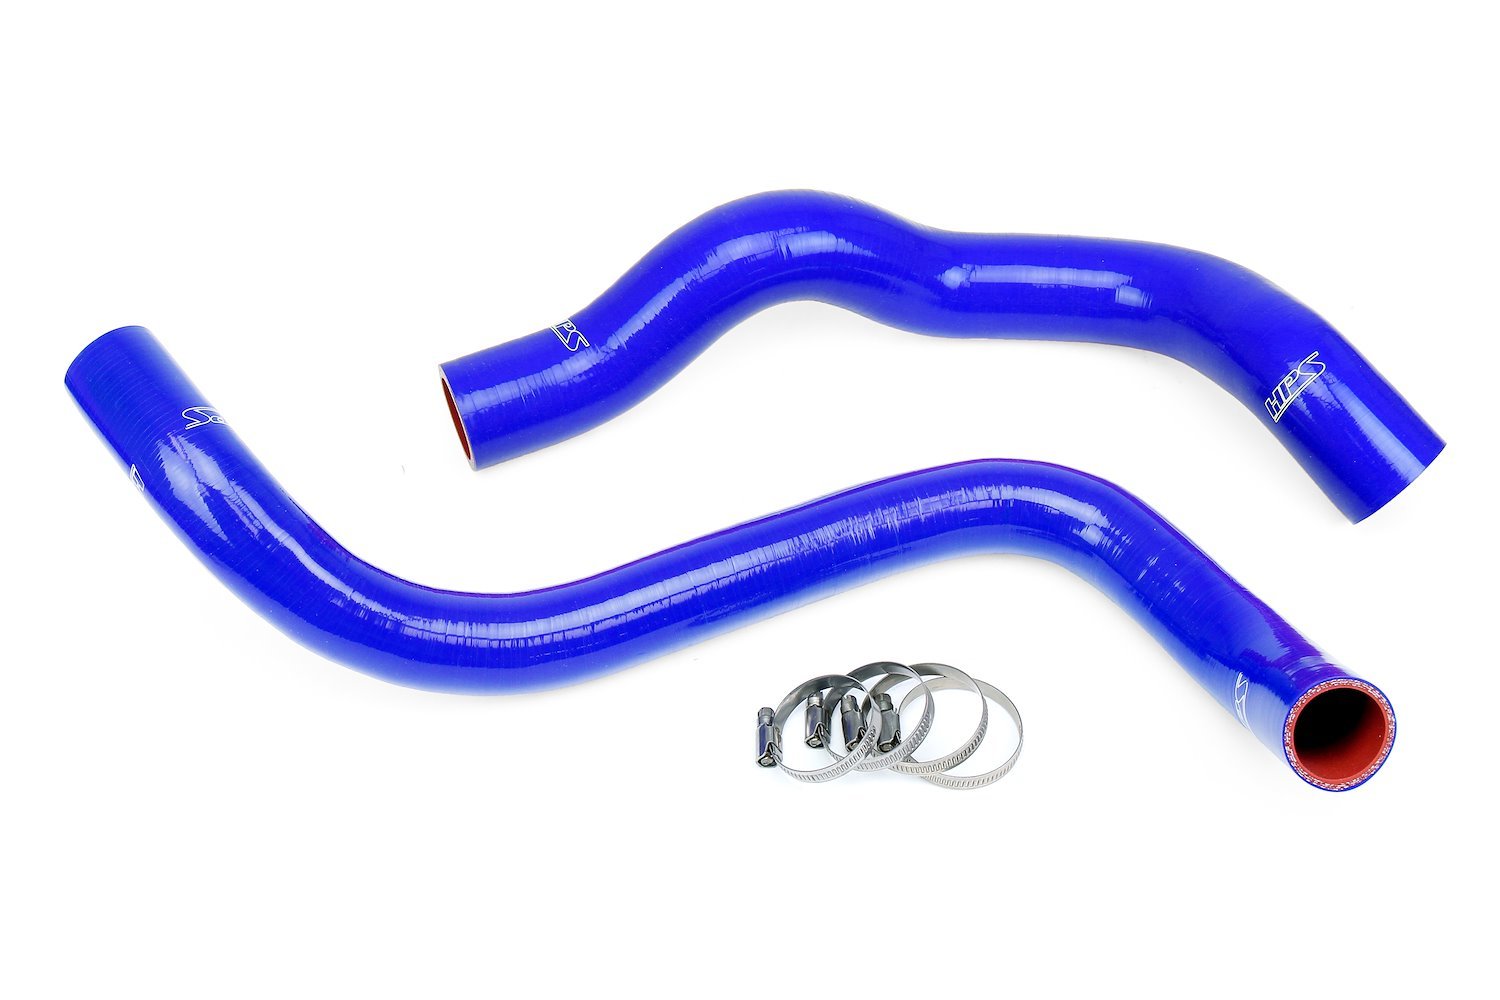 57-1903-BLUE Radiator Hose Kit, 3-Ply Reinforced Silicone, Replaces Rubber Radiator Coolant Hoses